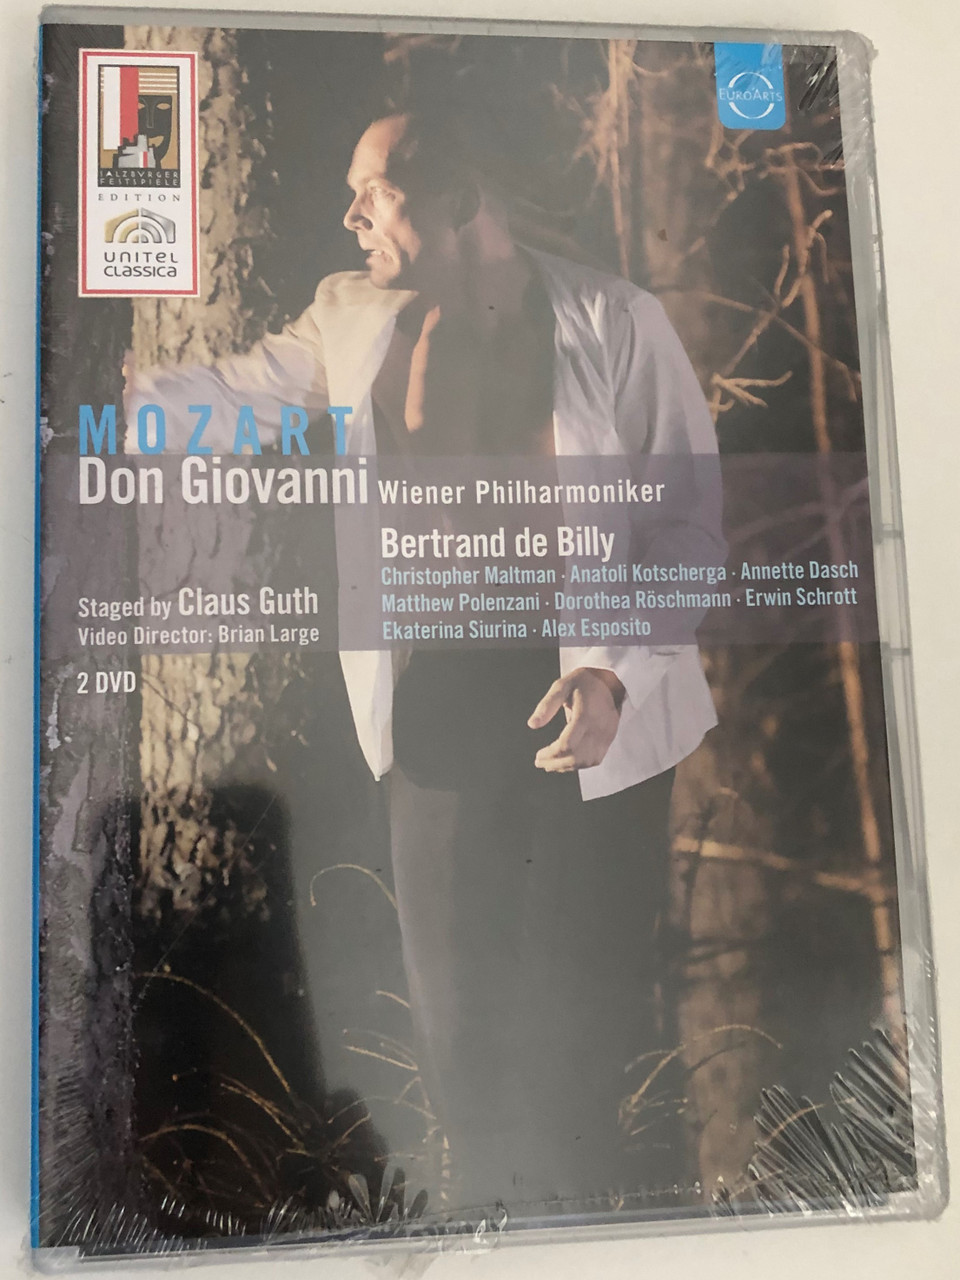 https://cdn10.bigcommerce.com/s-62bdpkt7pb/products/55158/images/277160/Mozart_Don_Giovanni_2_DVDs_Recorded_at_the_Haus_fr_Mozart_during_the_2008_Salzburg_Festival_Wiener_Philharmoniker_Bertrand_de_Billy_Staged_by_Claus_Guth_Director_Brian_Large_1__21669.1687184839.1280.1280.JPG?c=2